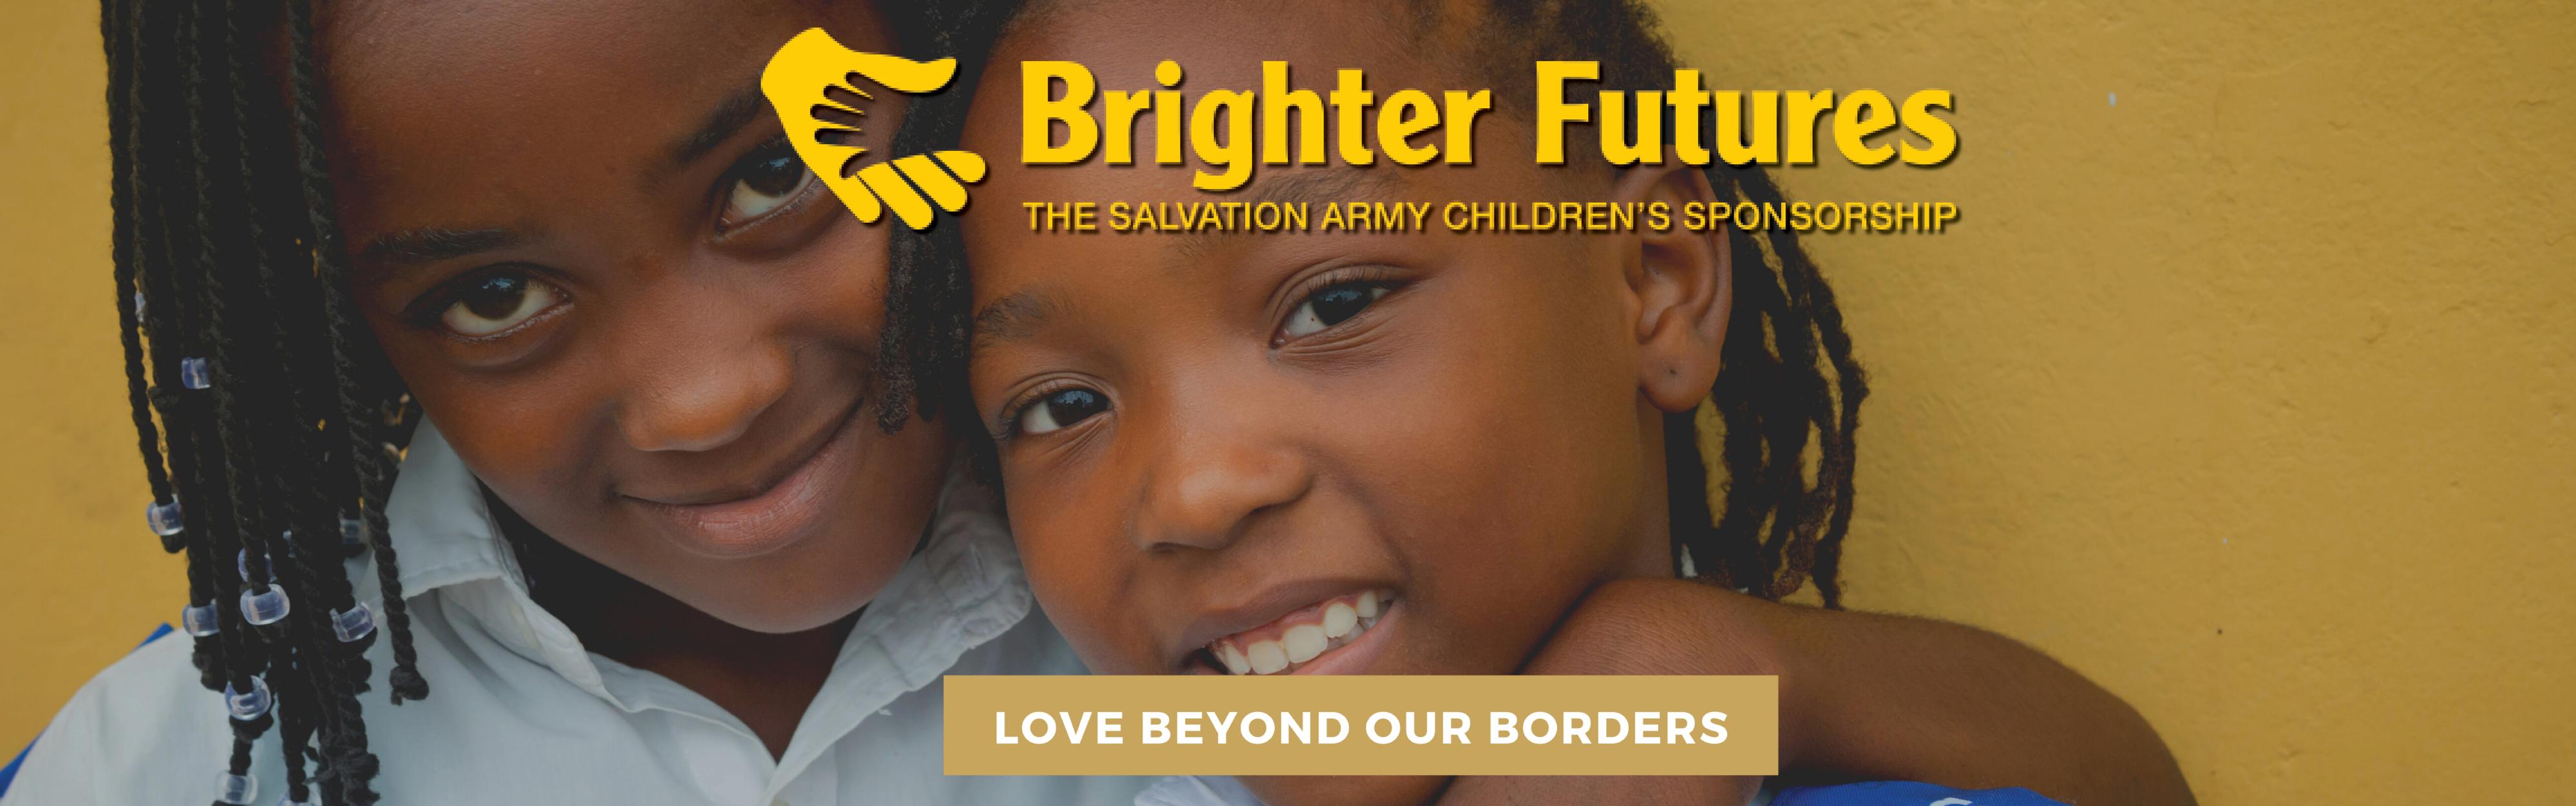 Brighter Futures banner - Photo of two young girls from Mozambique smling